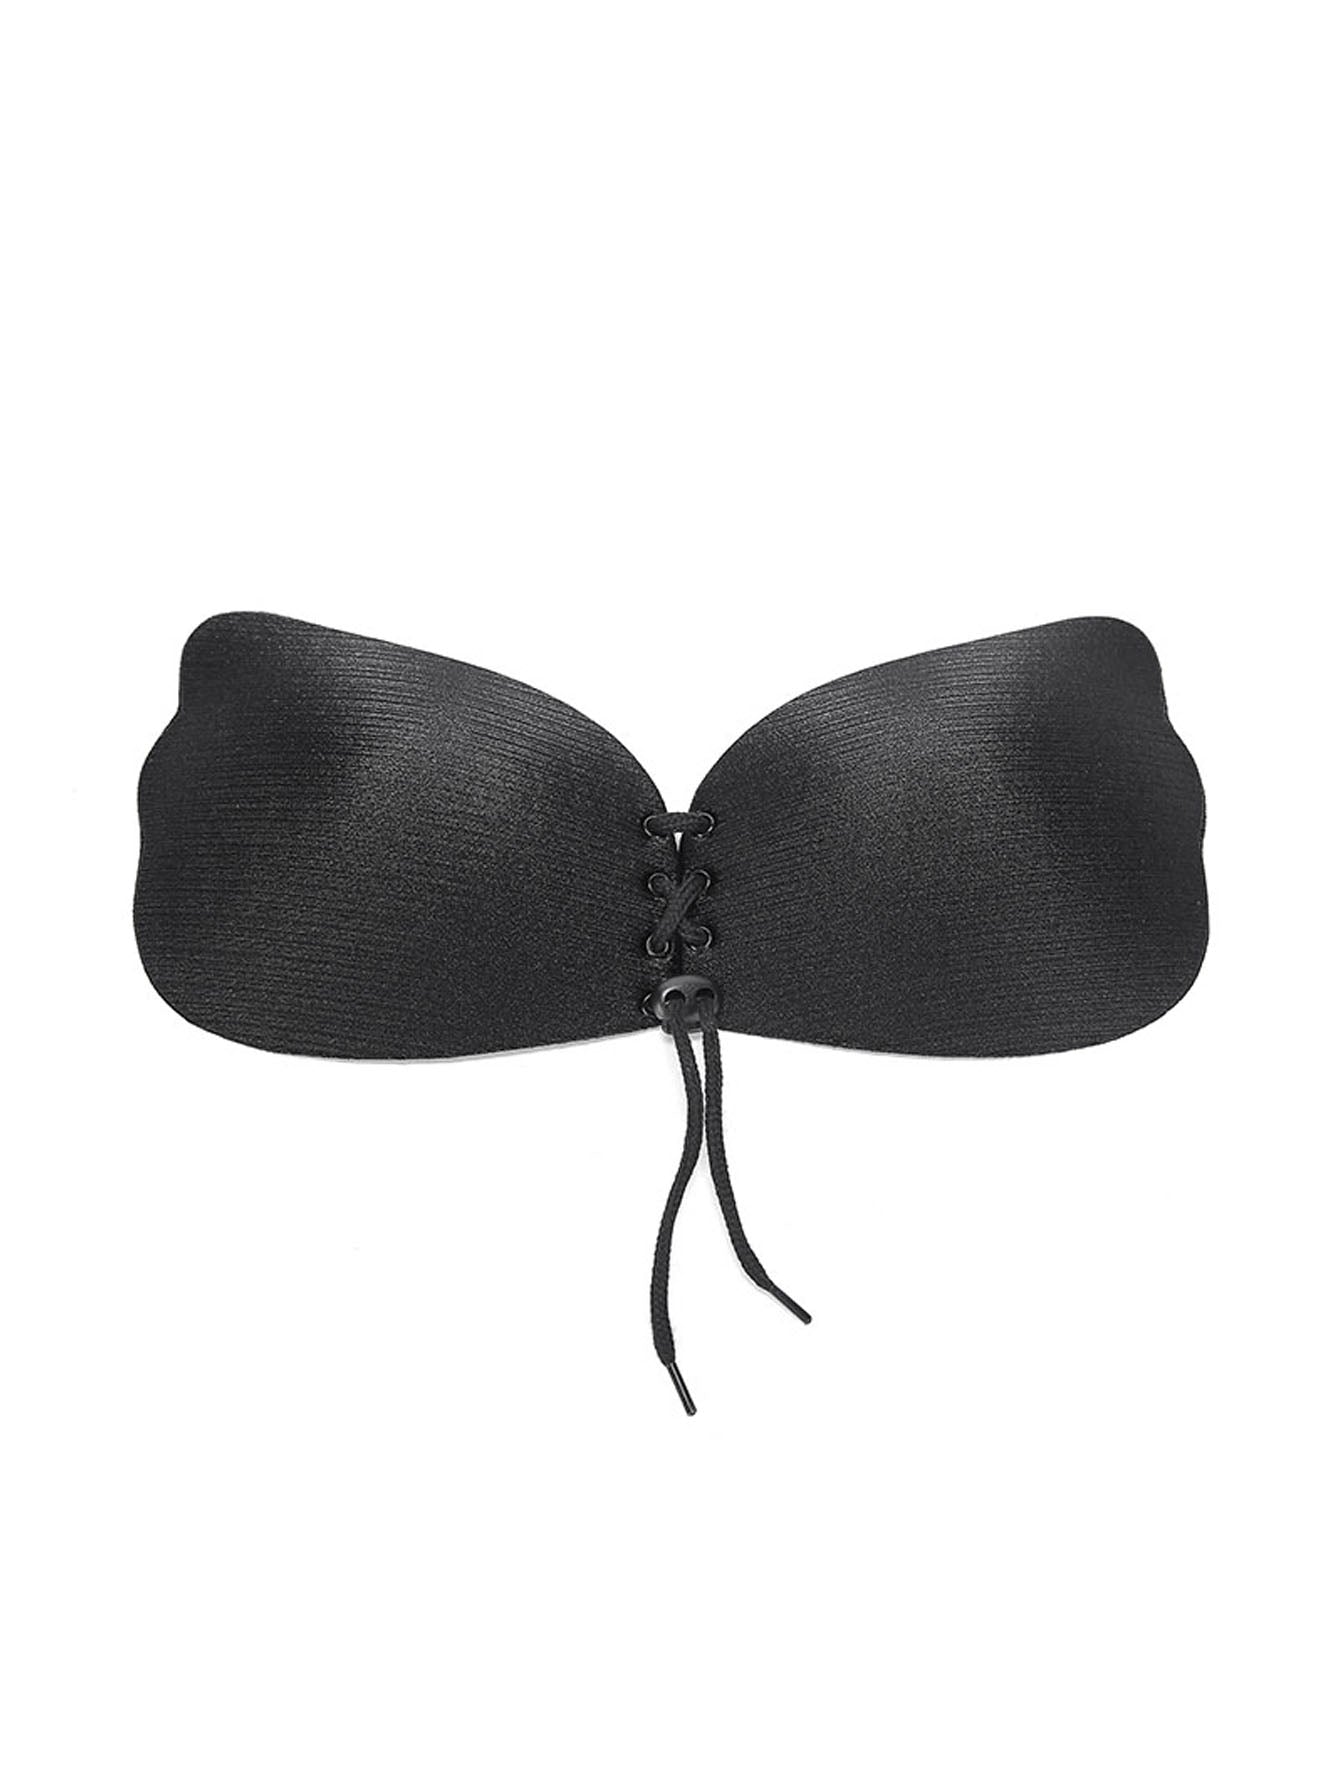 Women Reusable Sticky Invisible Push up silicone bra for Backless Strapless dress Sai Feel